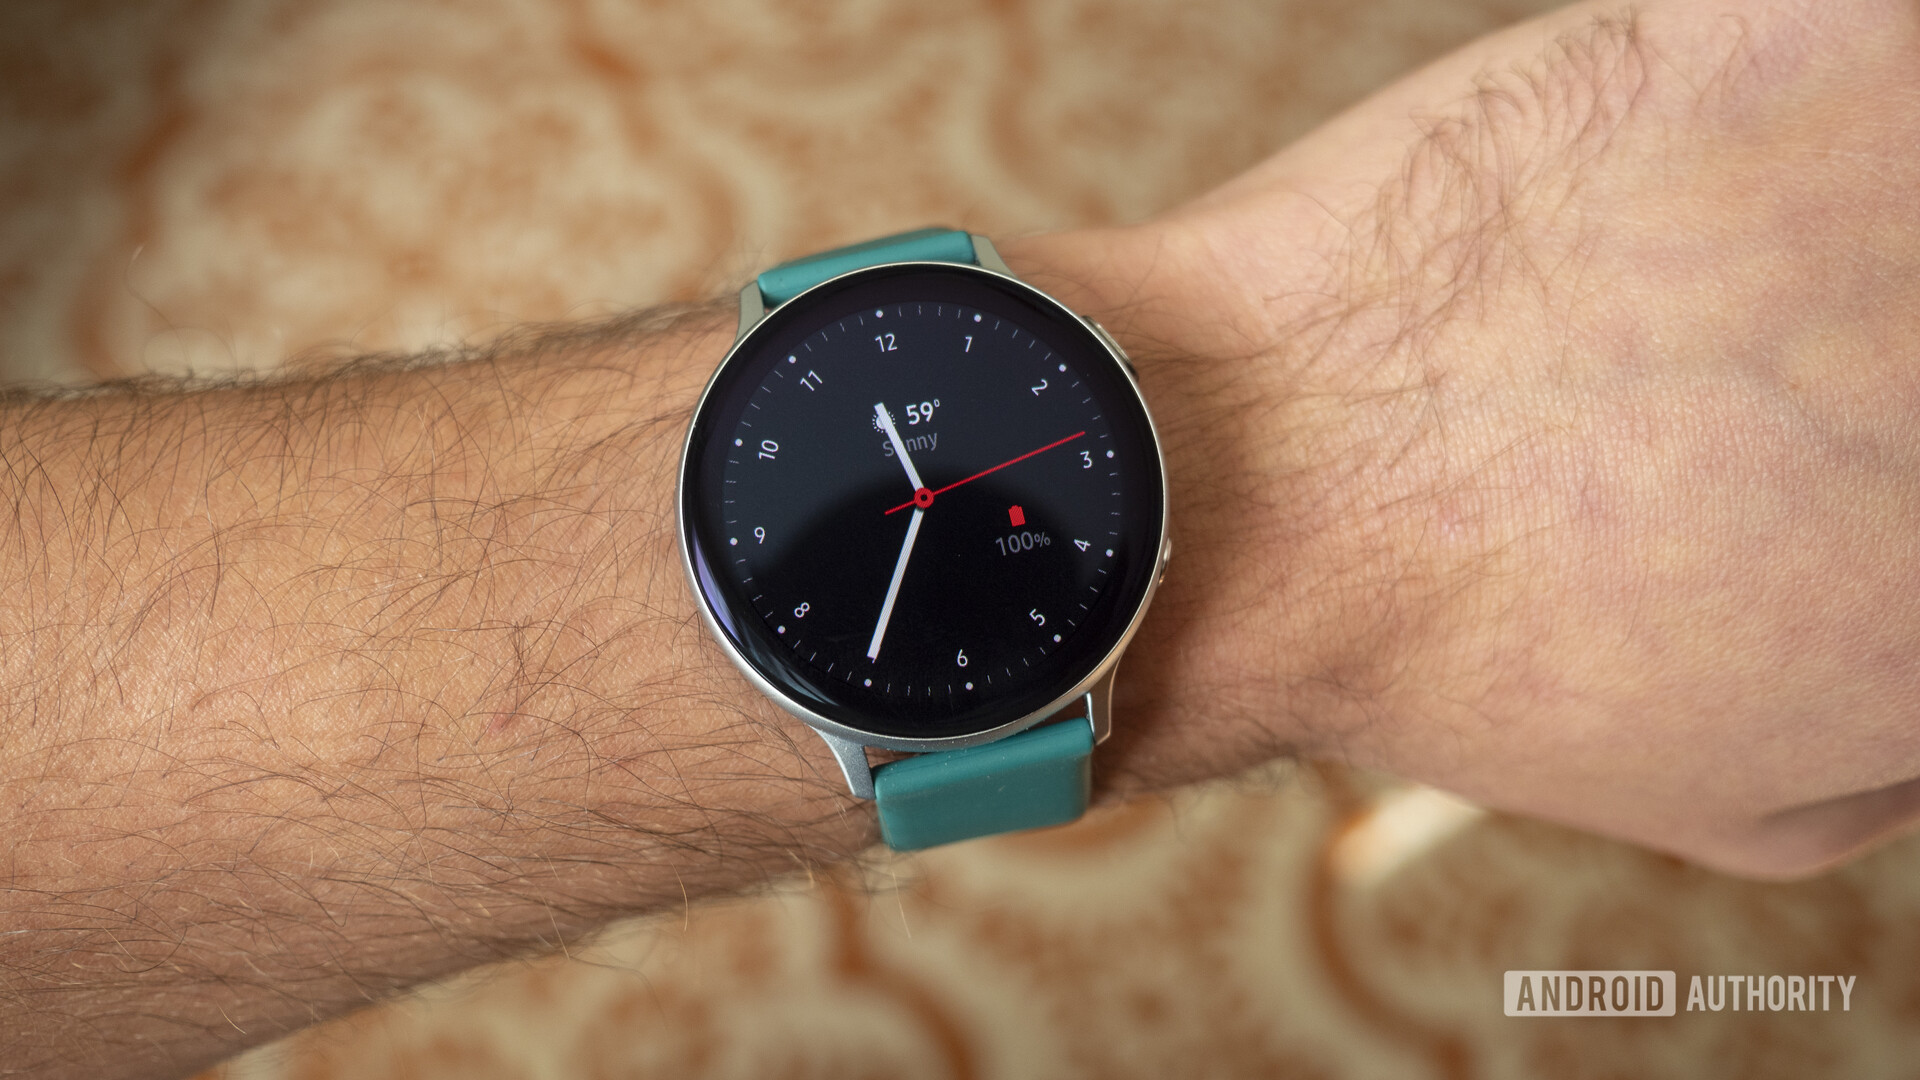 A user models a Samsung Galaxy Watch Active 2 watch face on his wrist.